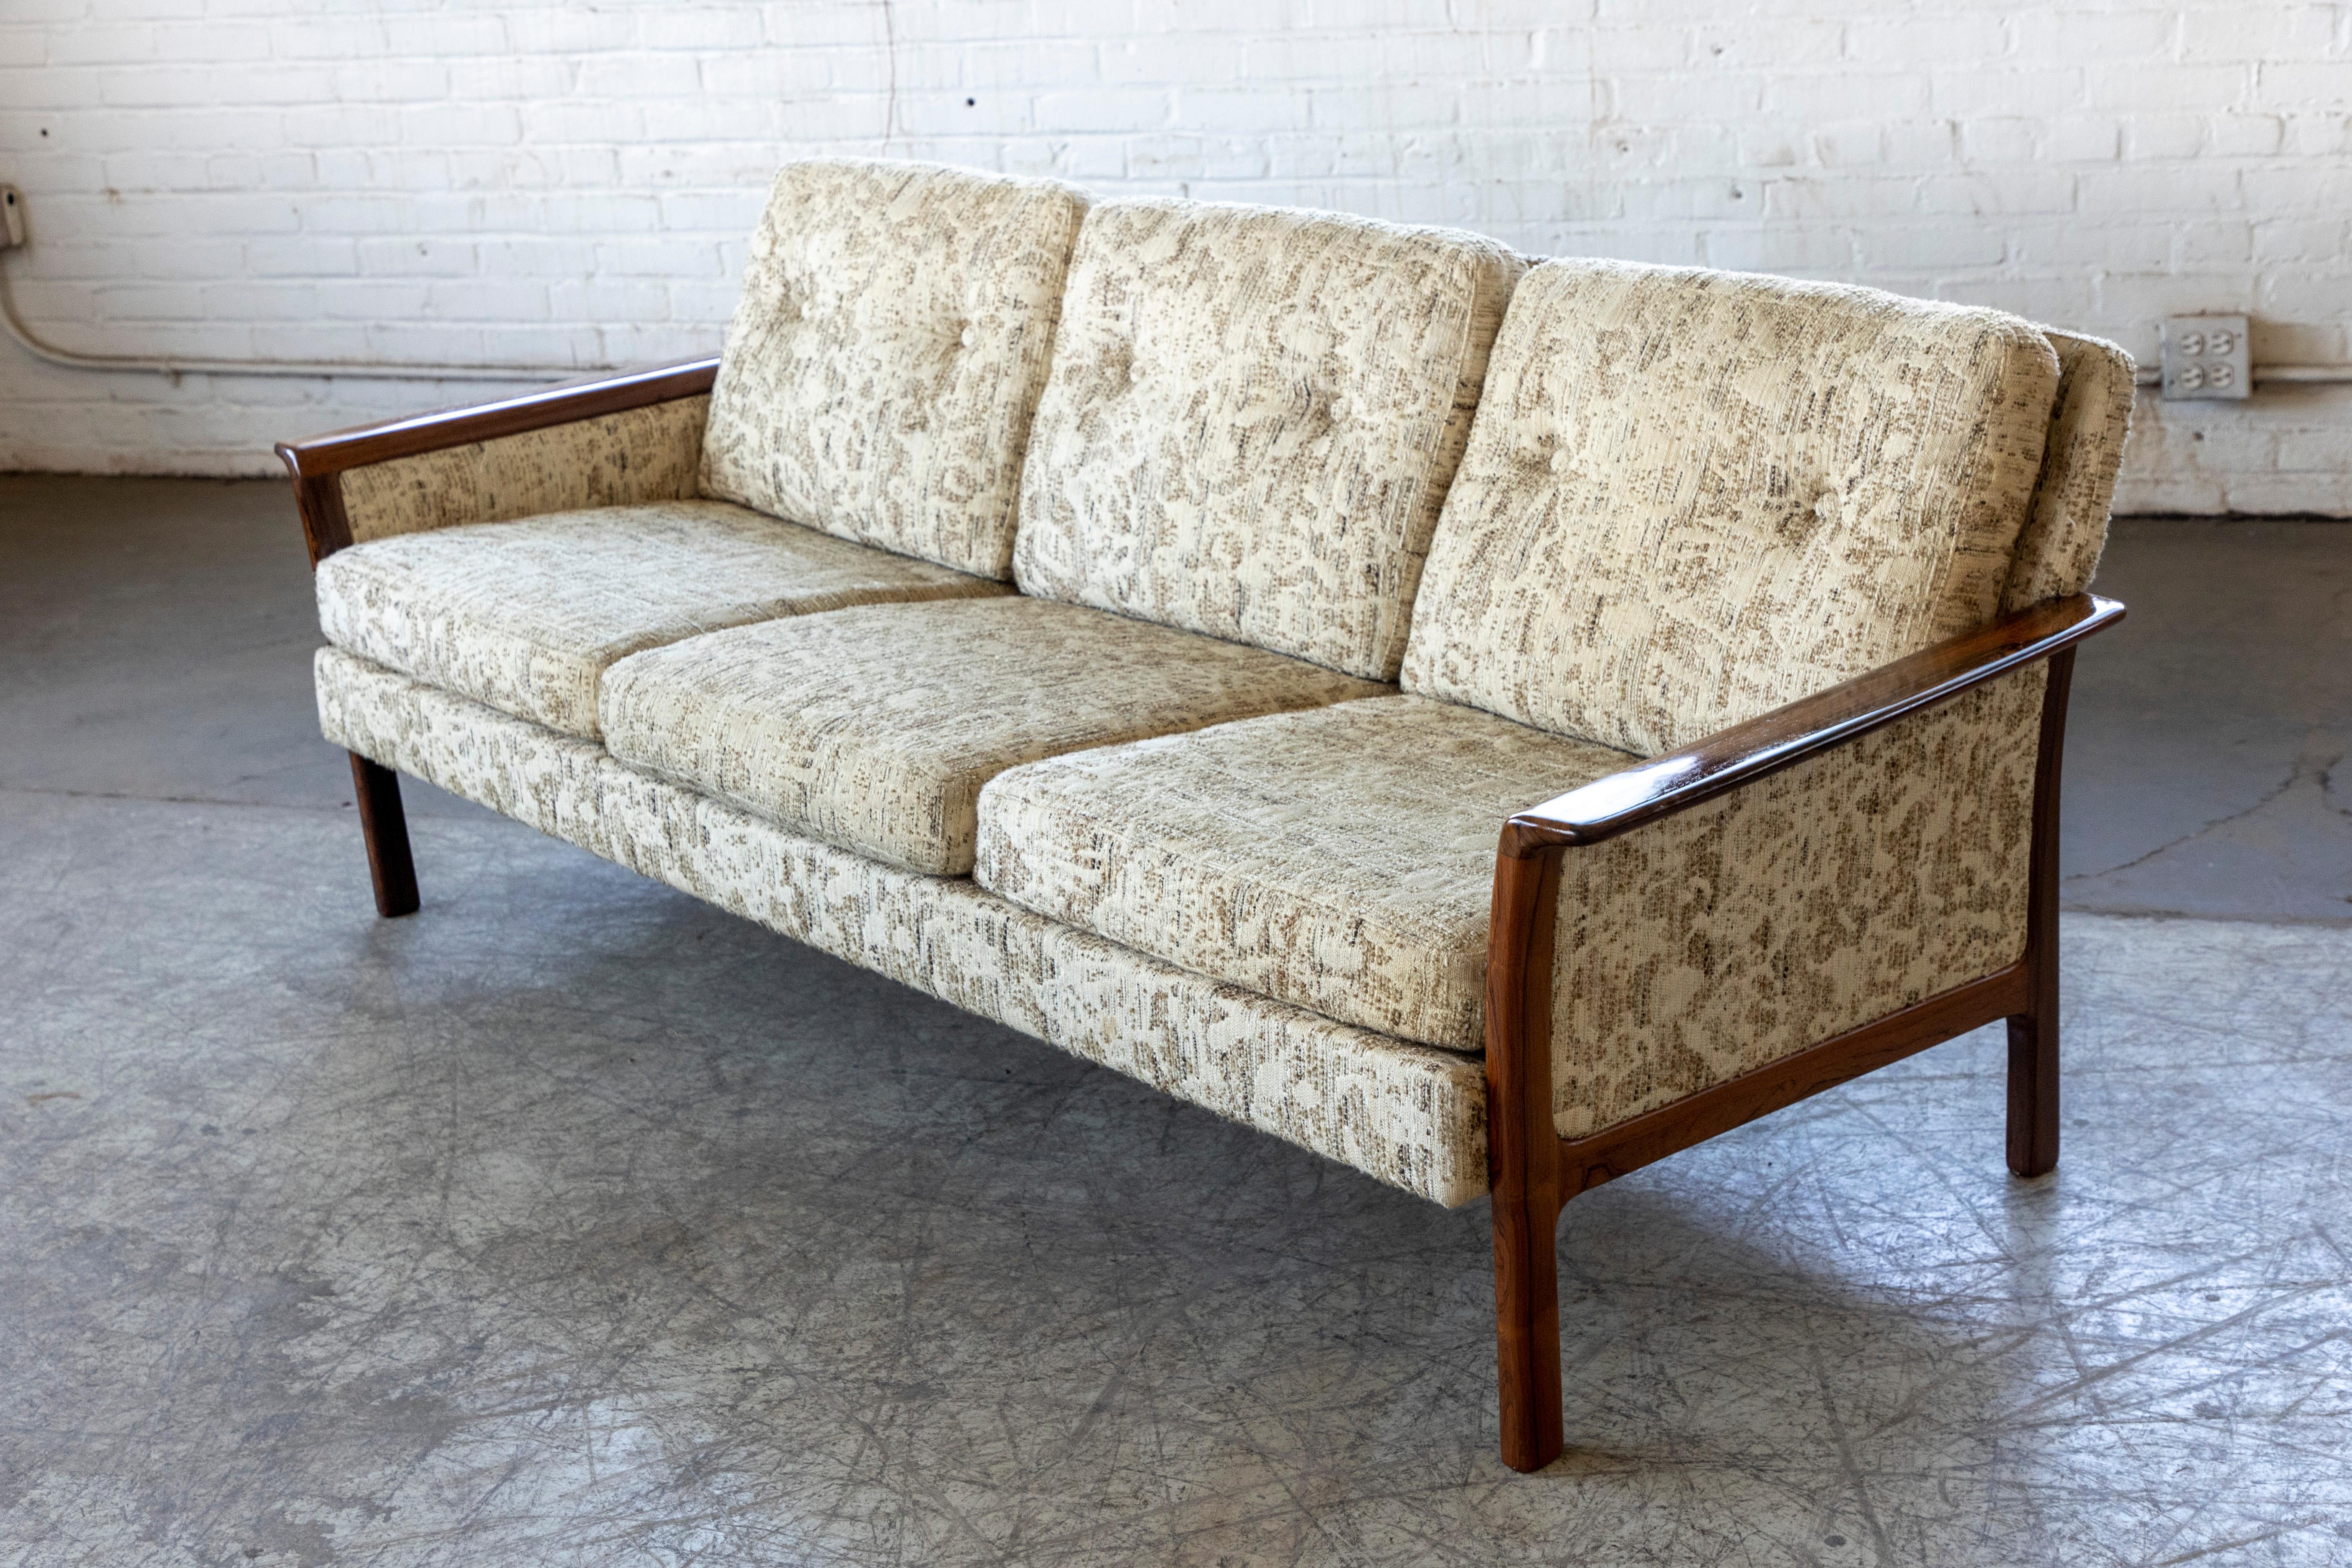 Very elegant and upscale sofa by Hans OIsen designed for Vatne Mobler and manufactured in Norway in the 1960's. Wool fabric sofa with rolling rosewood frame and armrests. The wood is in very good original condition with deep color and grain. The